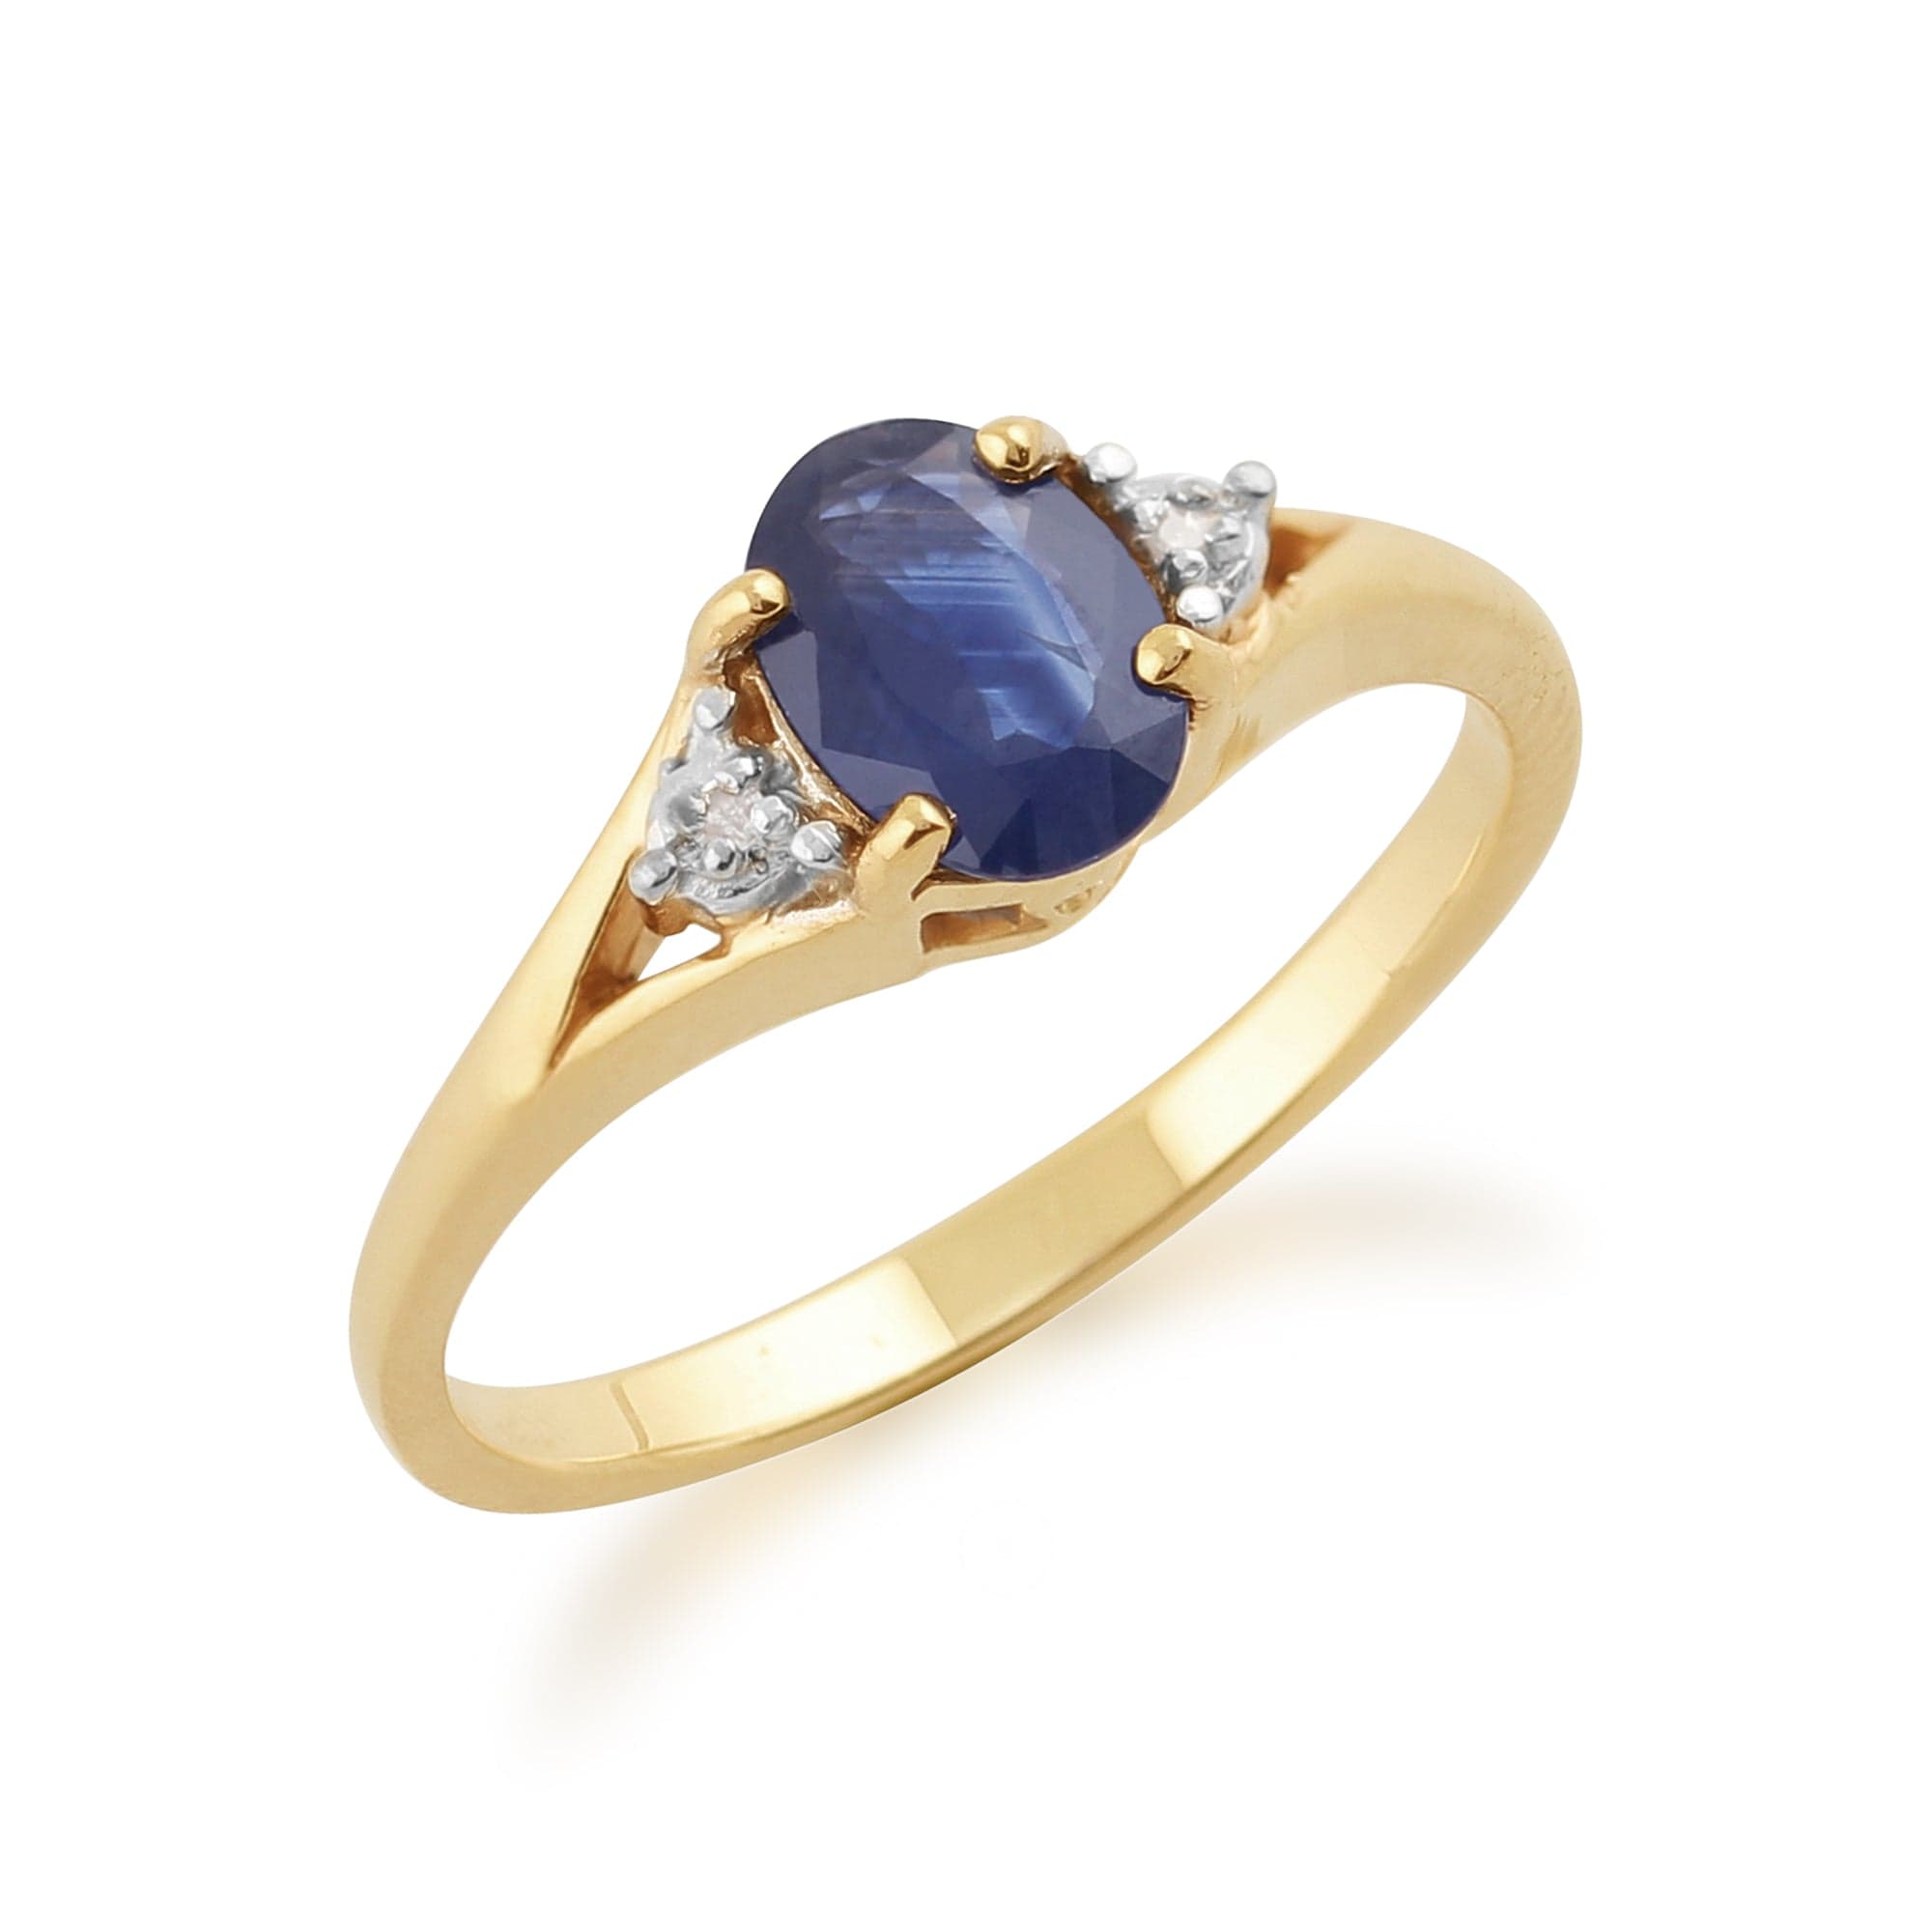 26997 Classic Oval Light Blue Sapphire & Diamond Ring in 9ct Yellow Gold 2